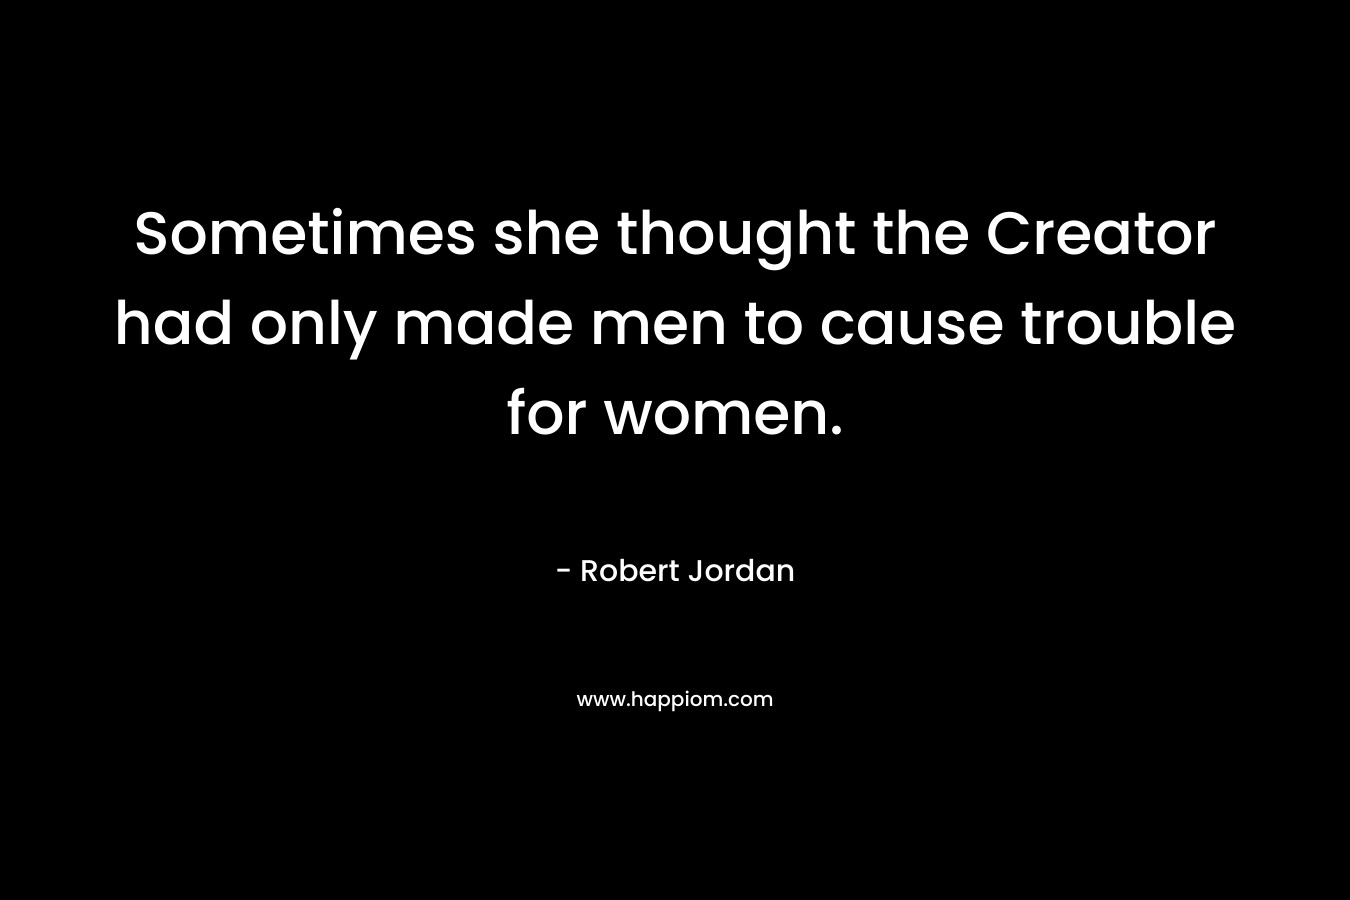 Sometimes she thought the Creator had only made men to cause trouble for women.